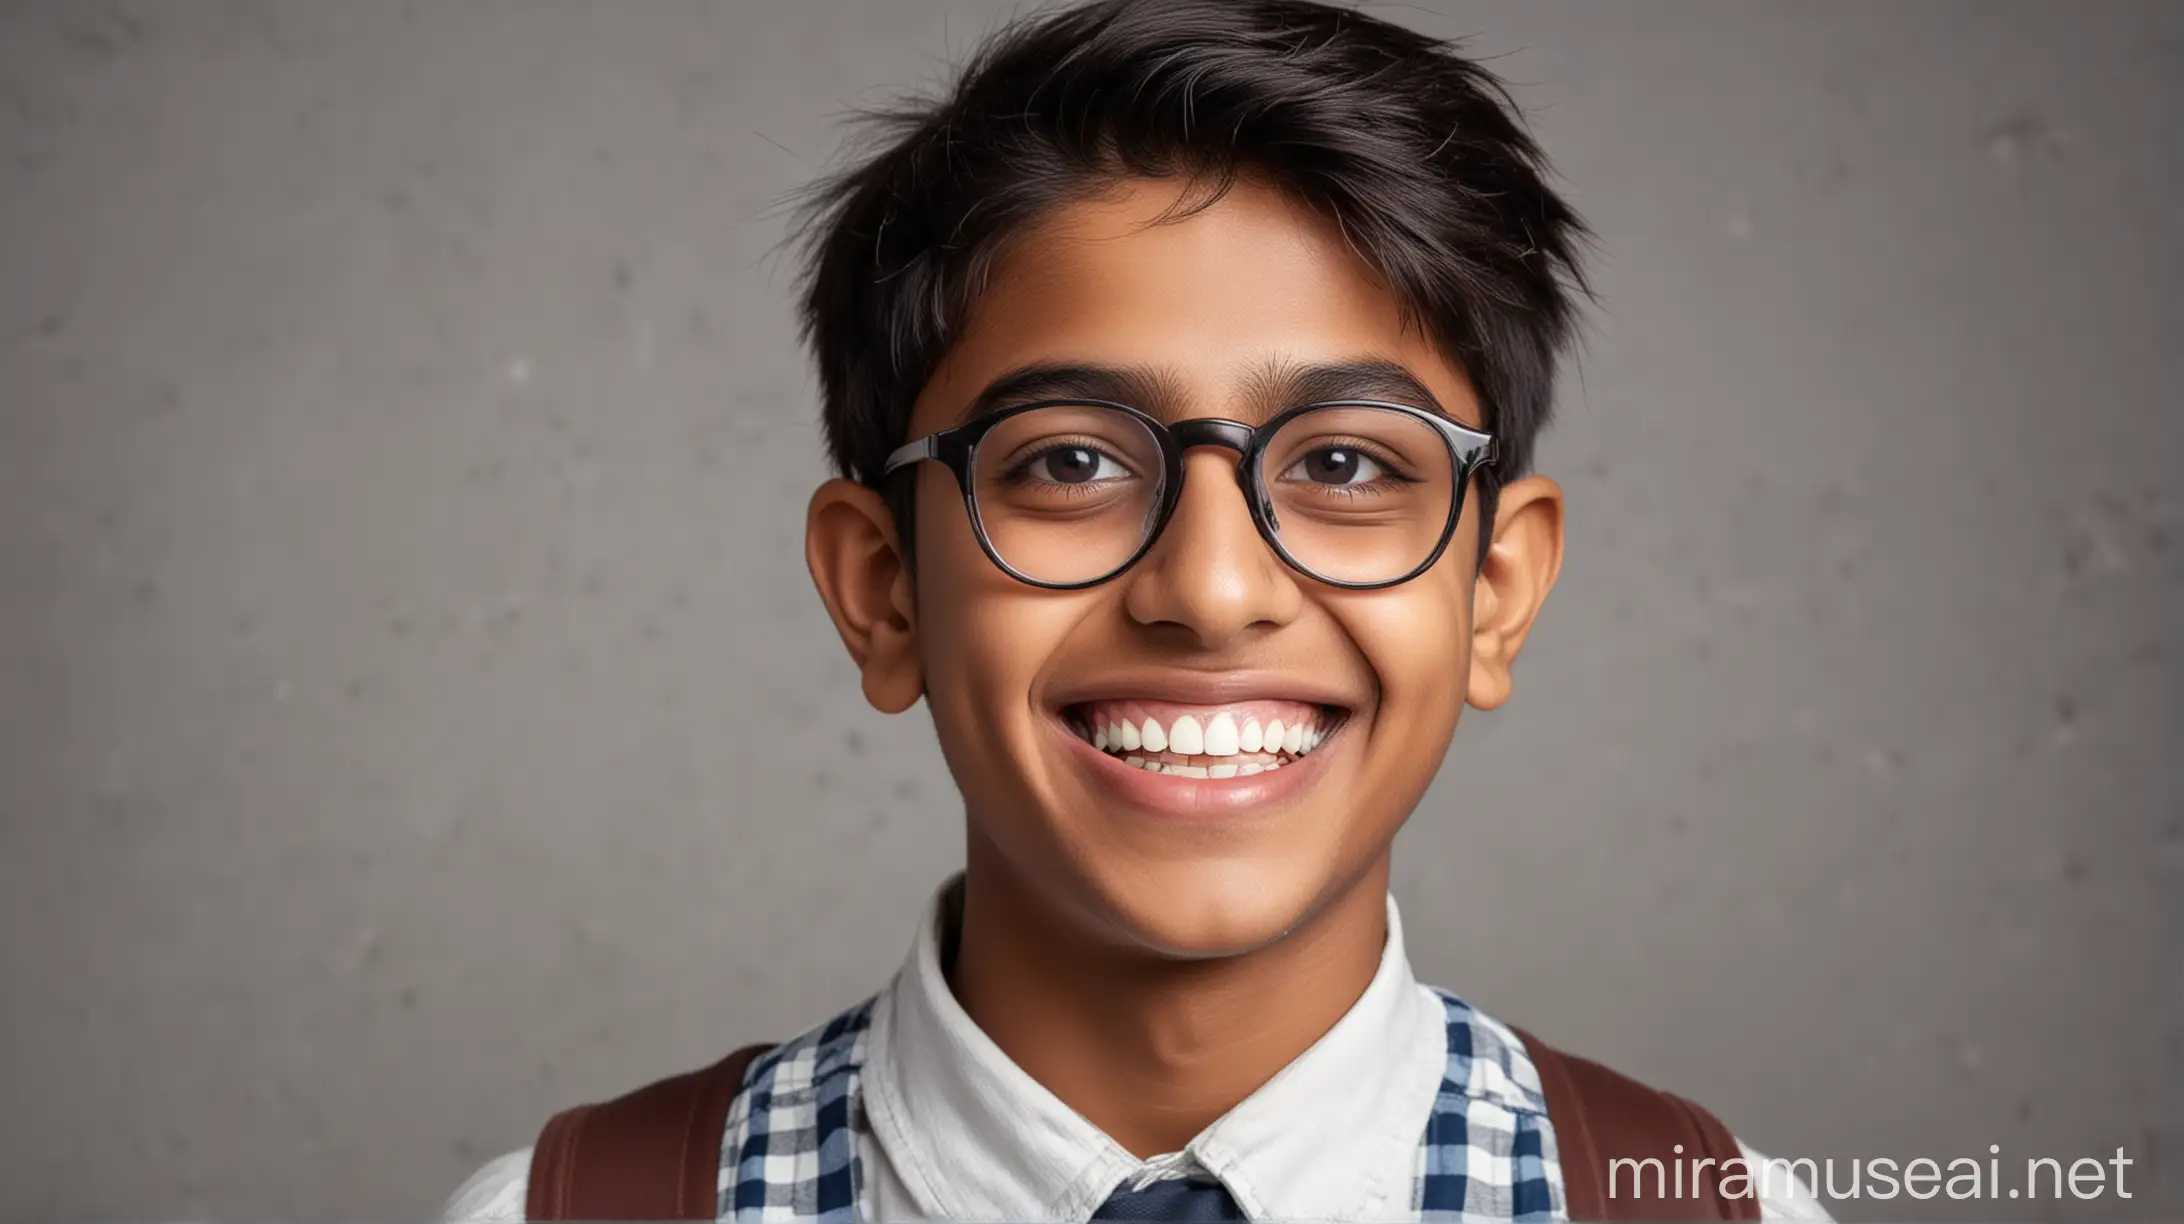 Indian Student with Glasses and Prominent Front Teeth